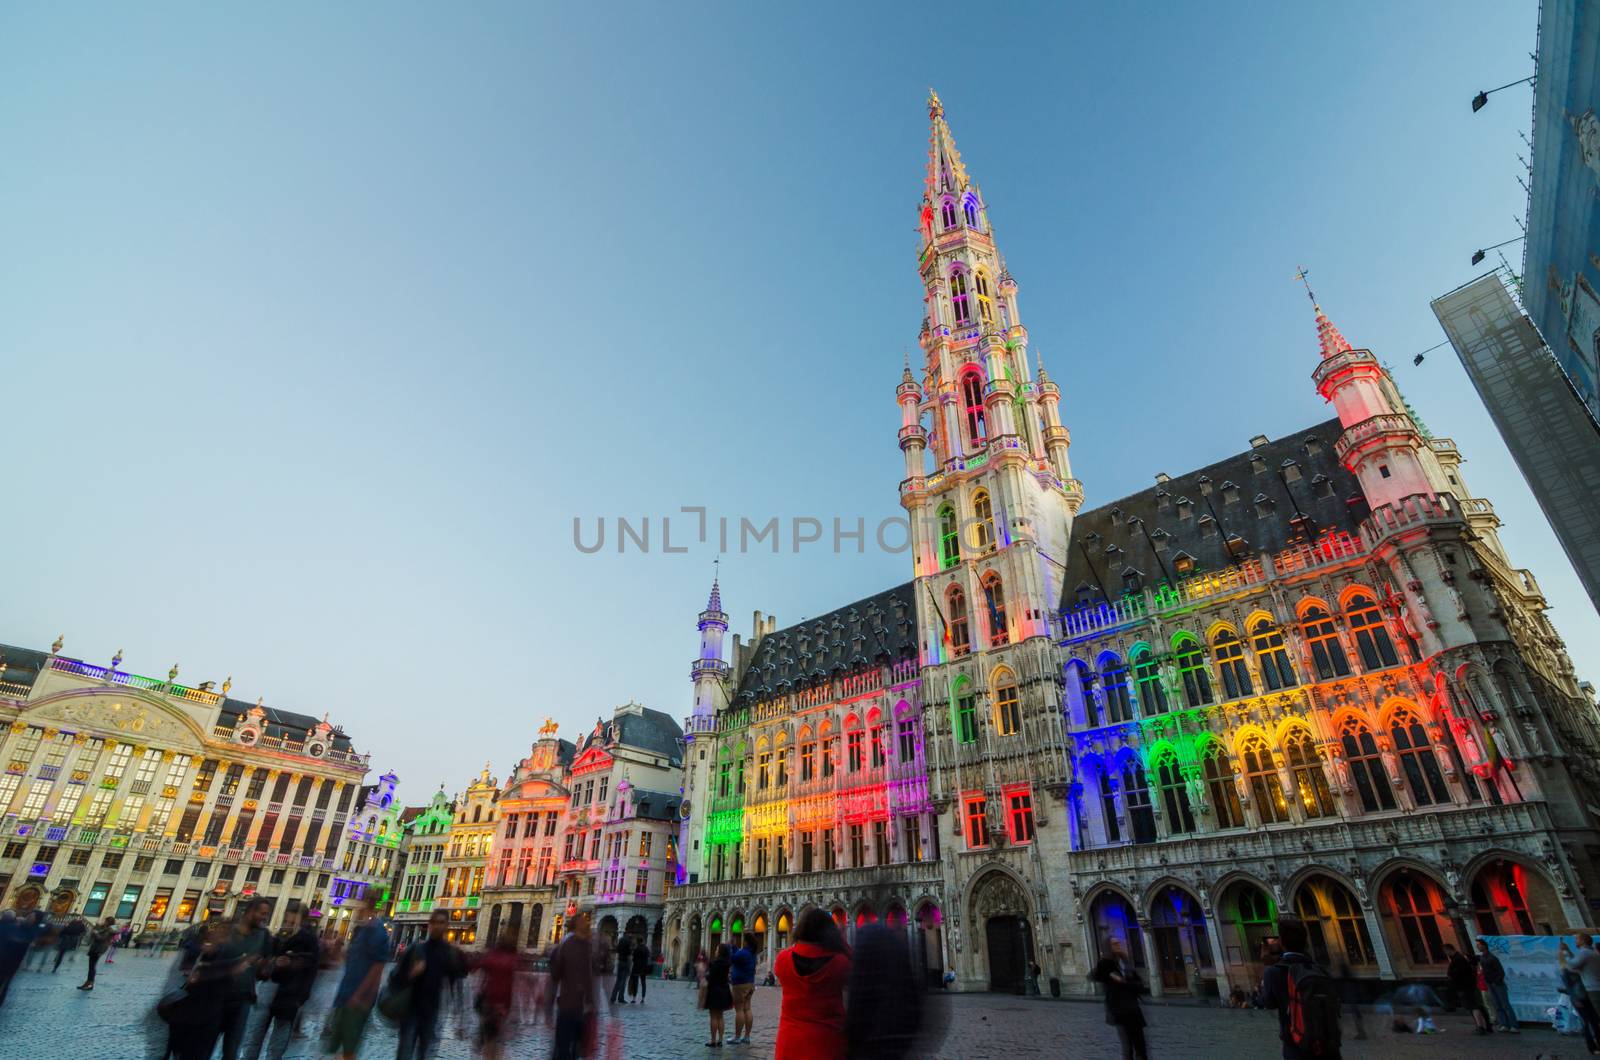 Brussels, Belgium - May 13, 2015: Tourists visiting famous Grand Place (Grote Markt) the central square of Brussels by siraanamwong